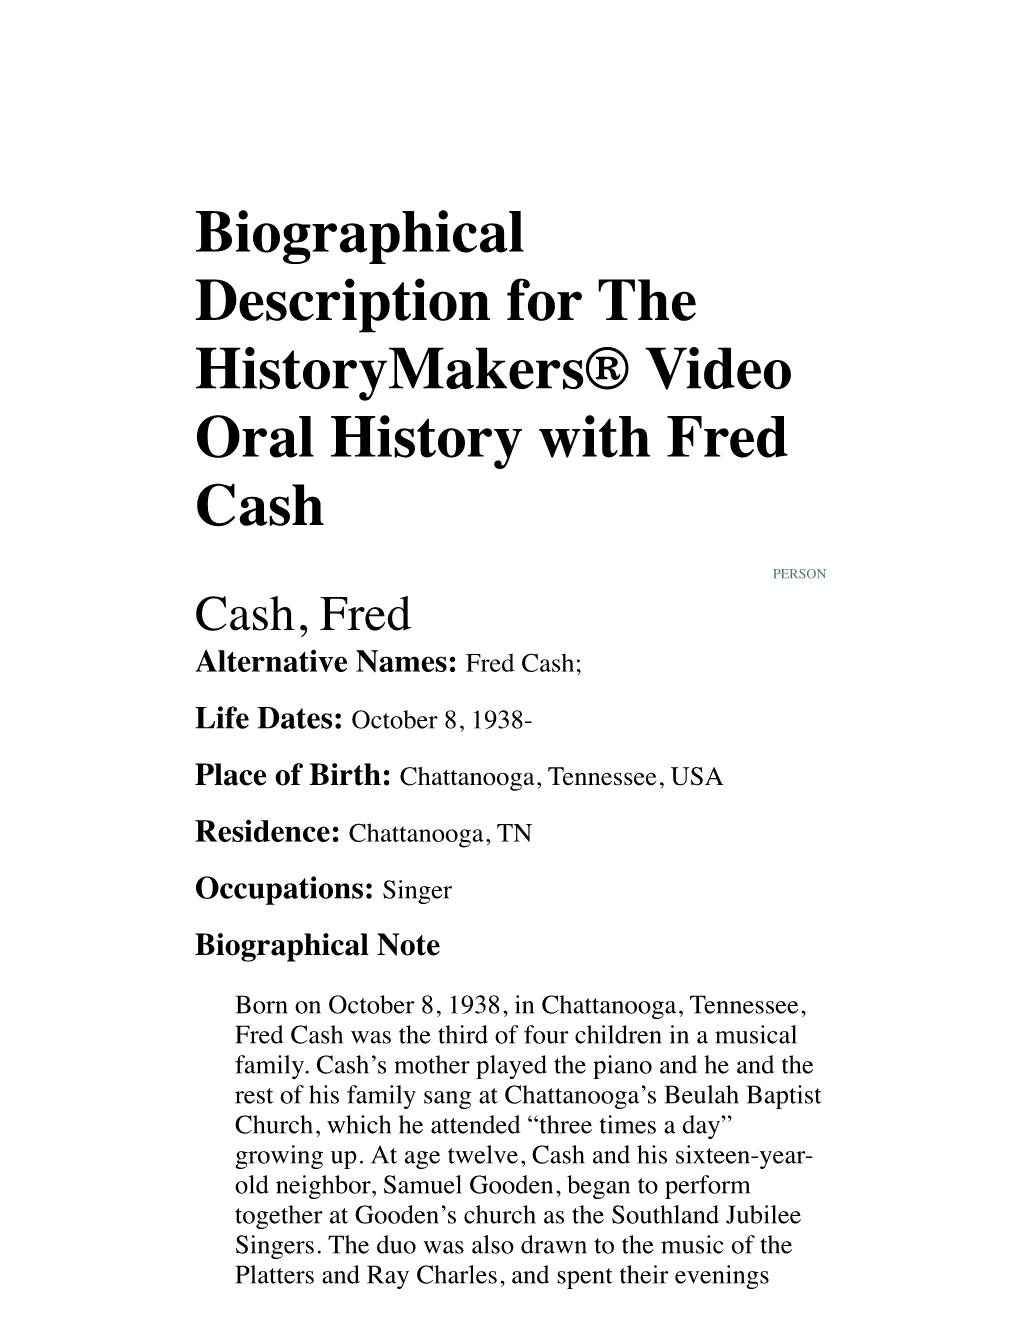 Biographical Description for the Historymakers® Video Oral History with Fred Cash